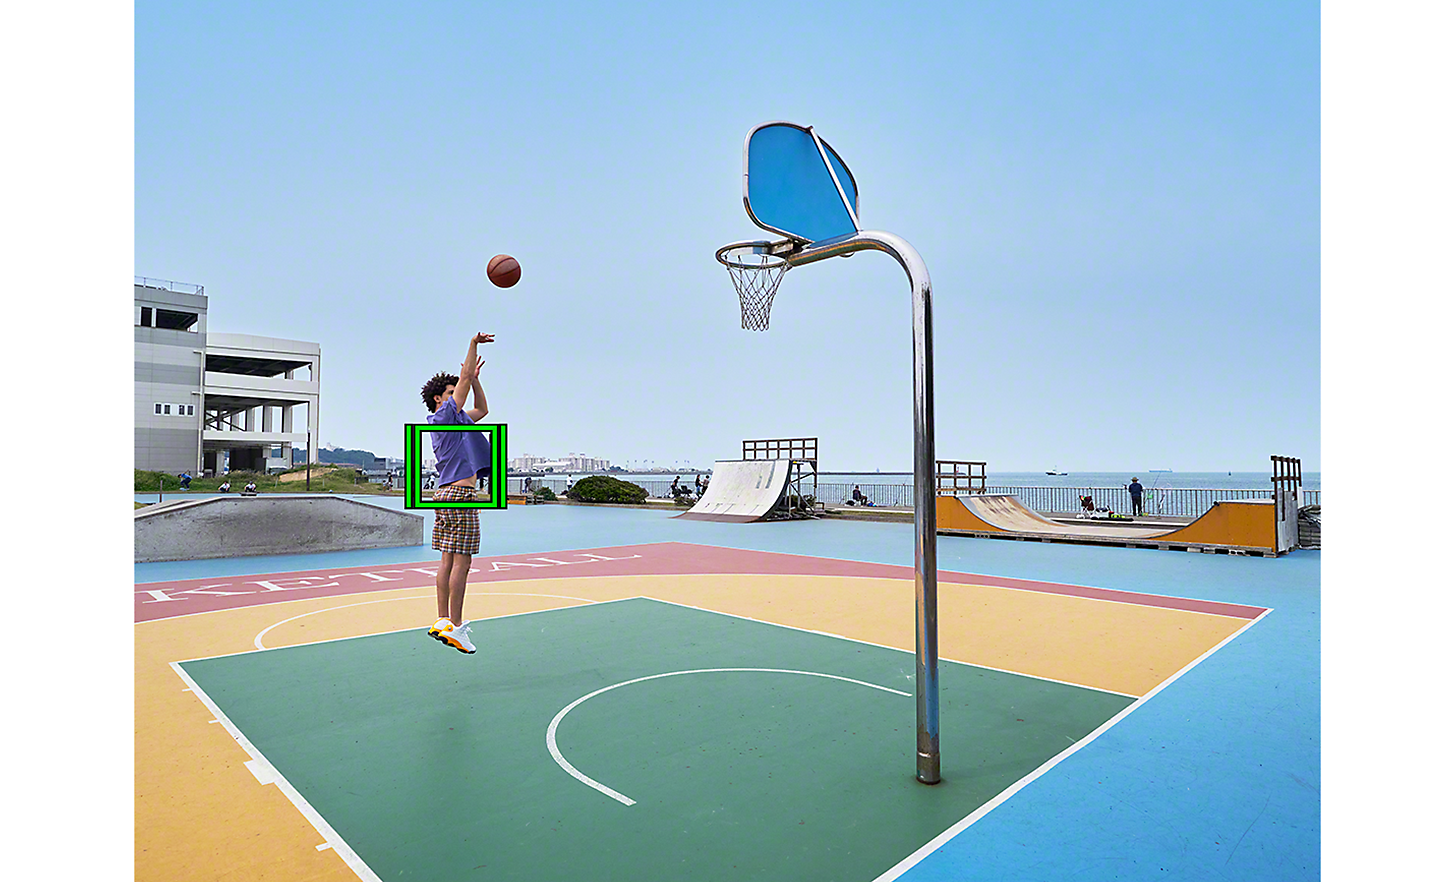 A basketball player taking a jump shot, a green square denoting Real-time Tracking